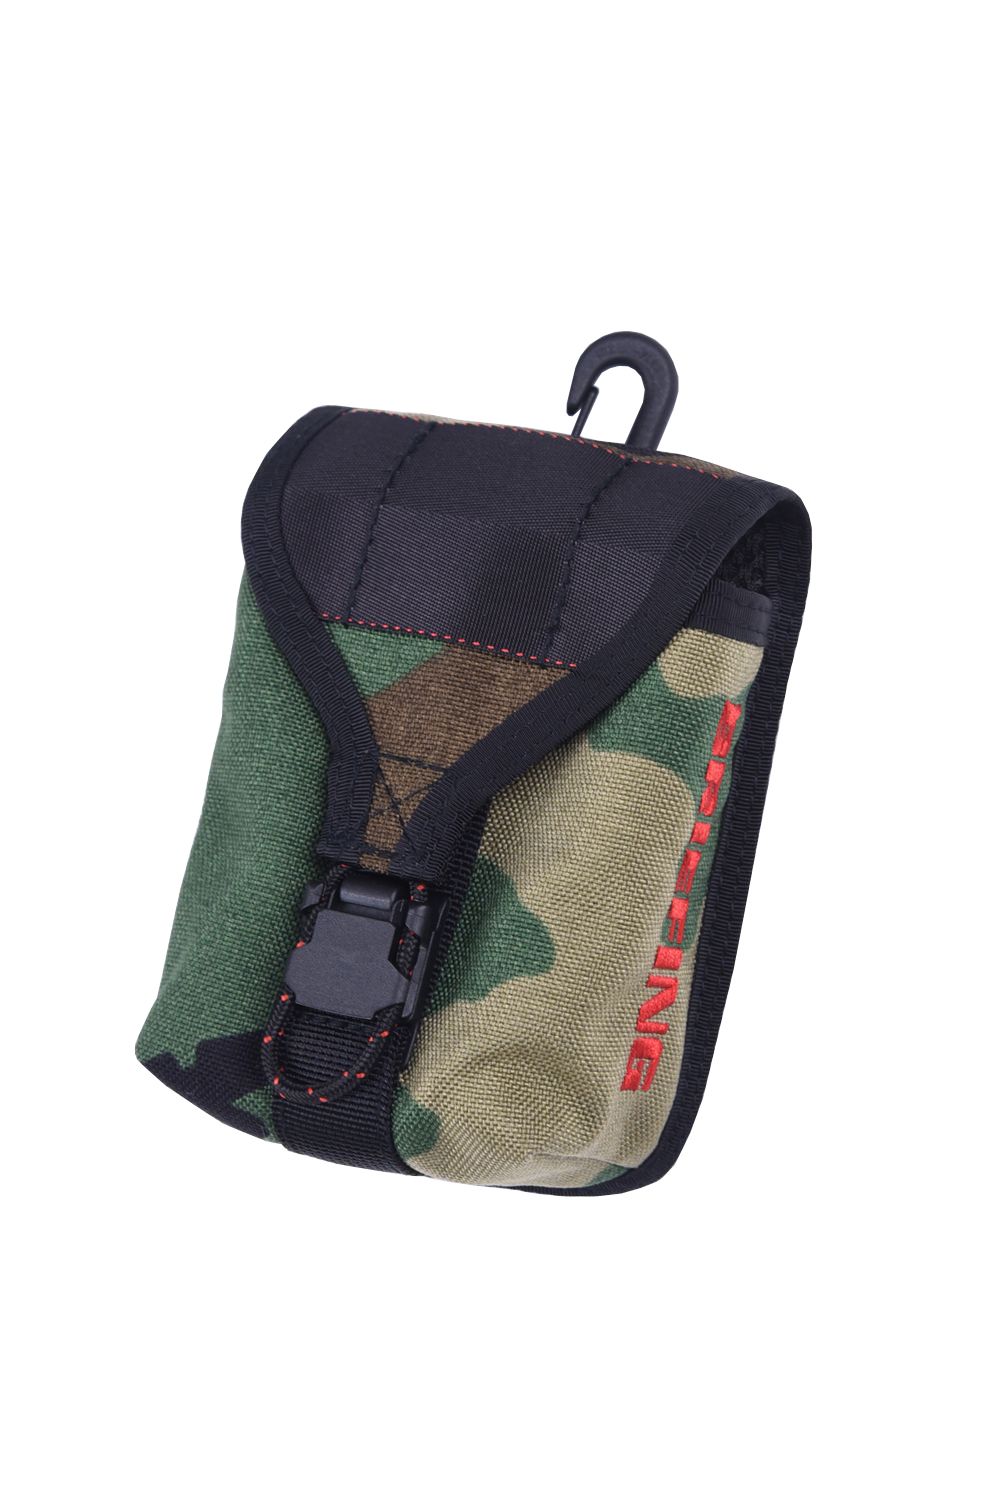 BRIEFING - 【1000Dコーデュラナイロン】 SCOPE BOX POUCH 